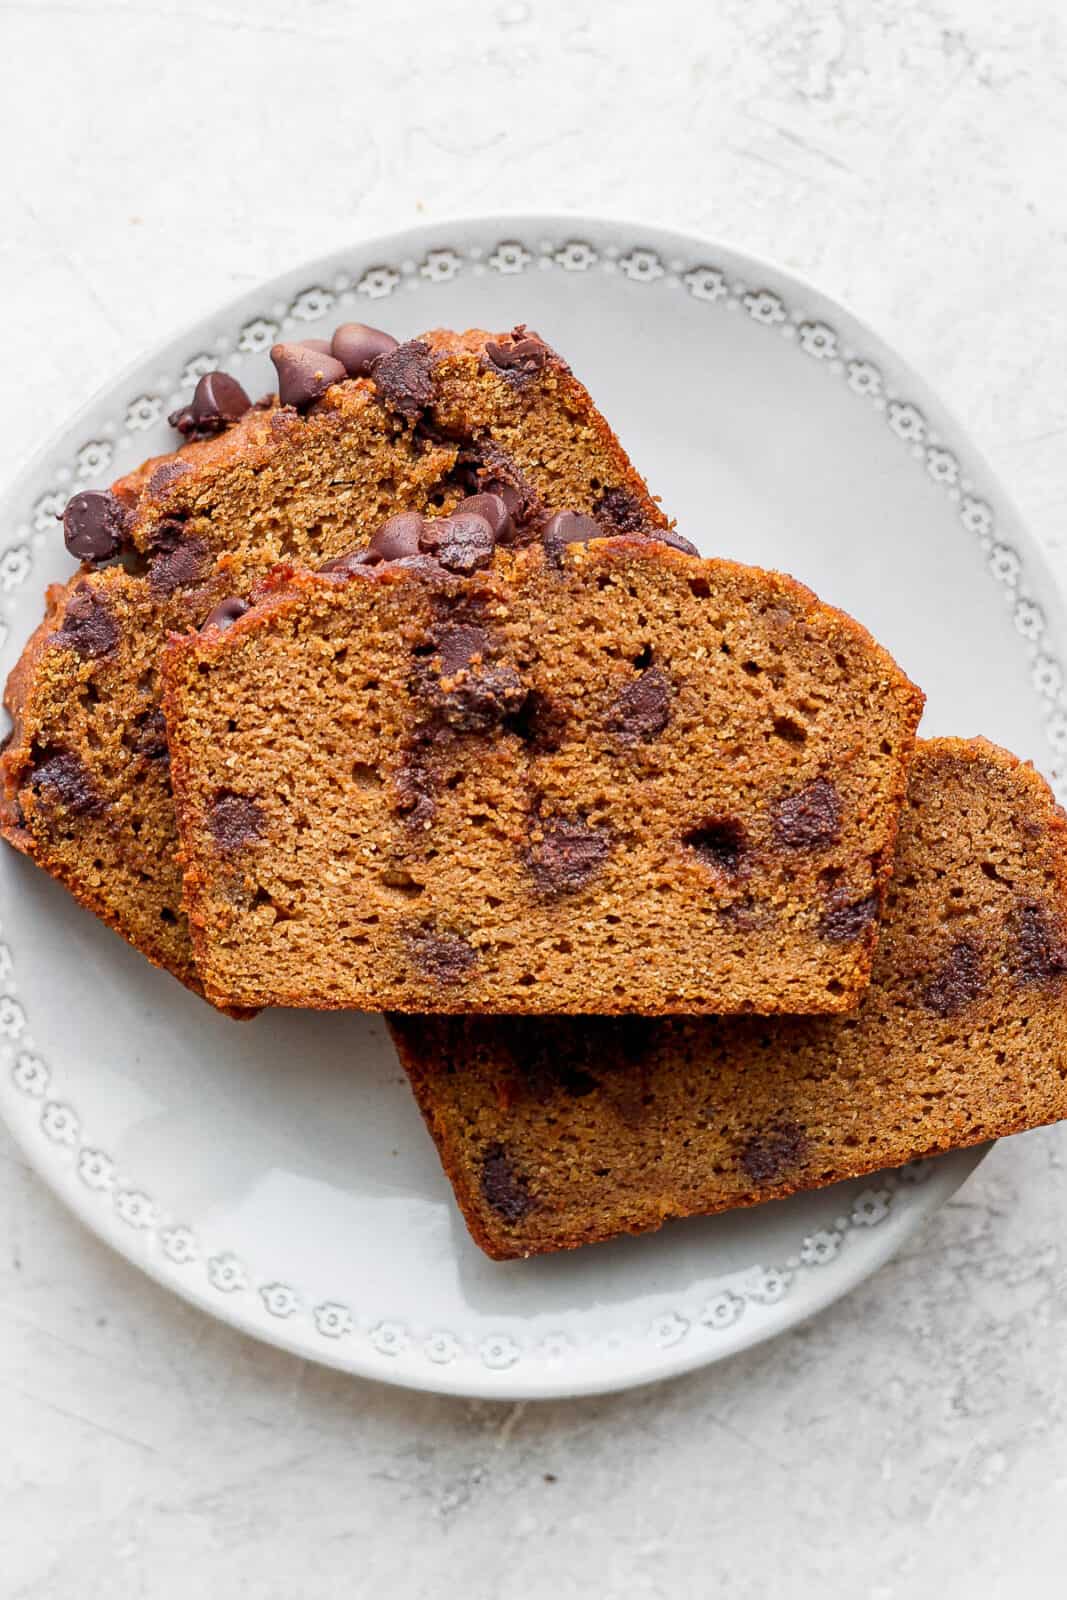 Three slices of pumpkin bread on a plate.